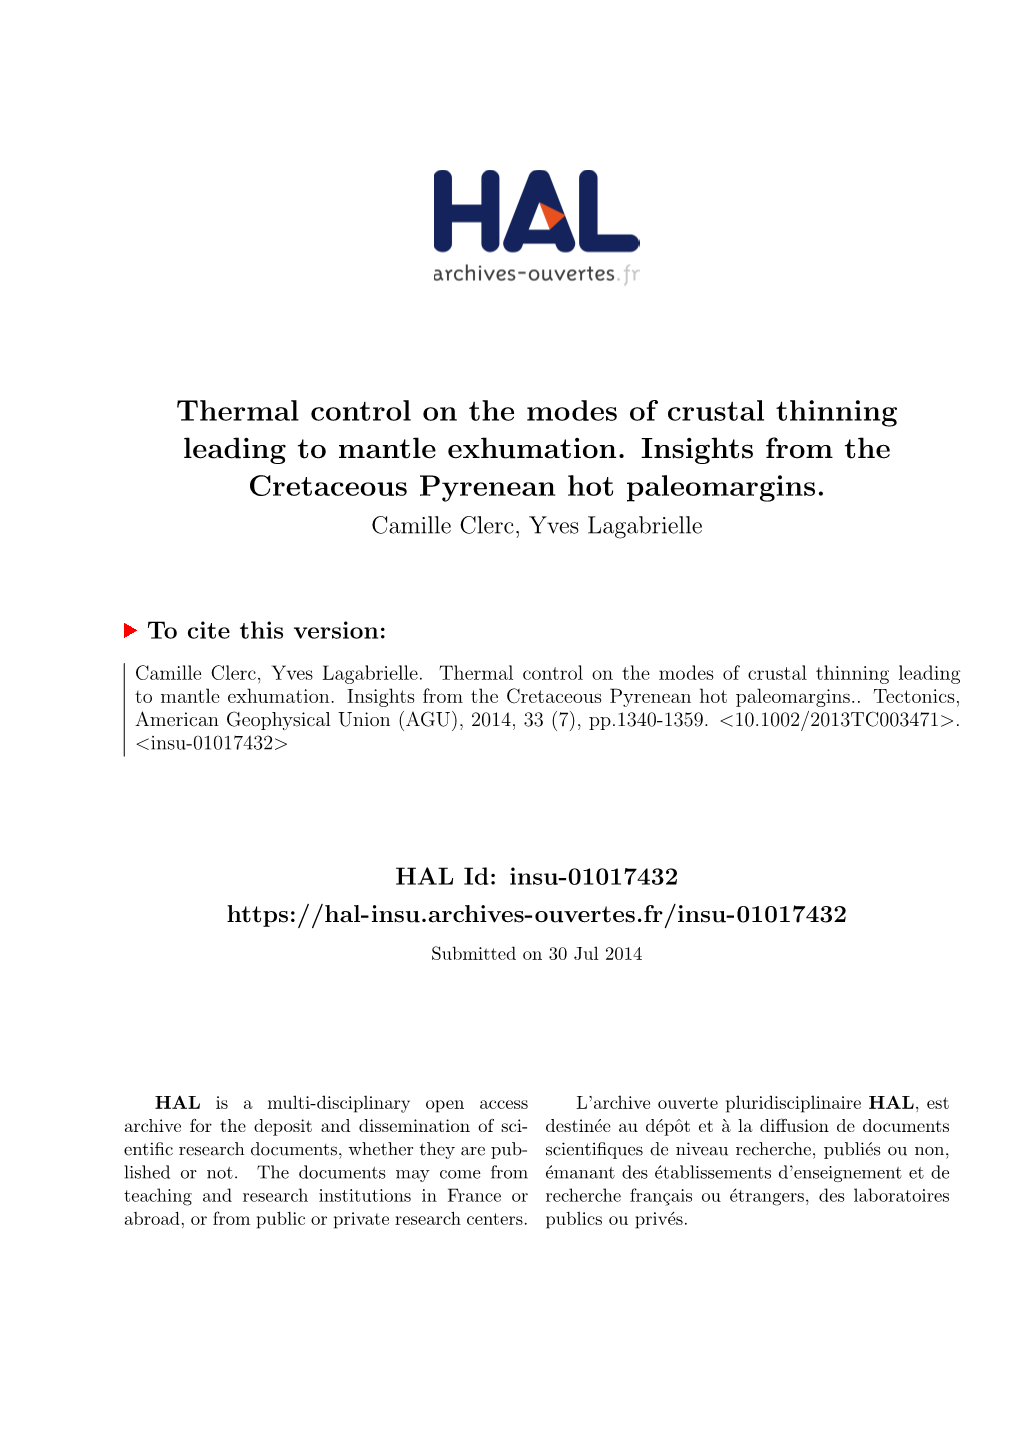 Thermal Control on the Modes of Crustal Thinning Leading to Mantle Exhumation